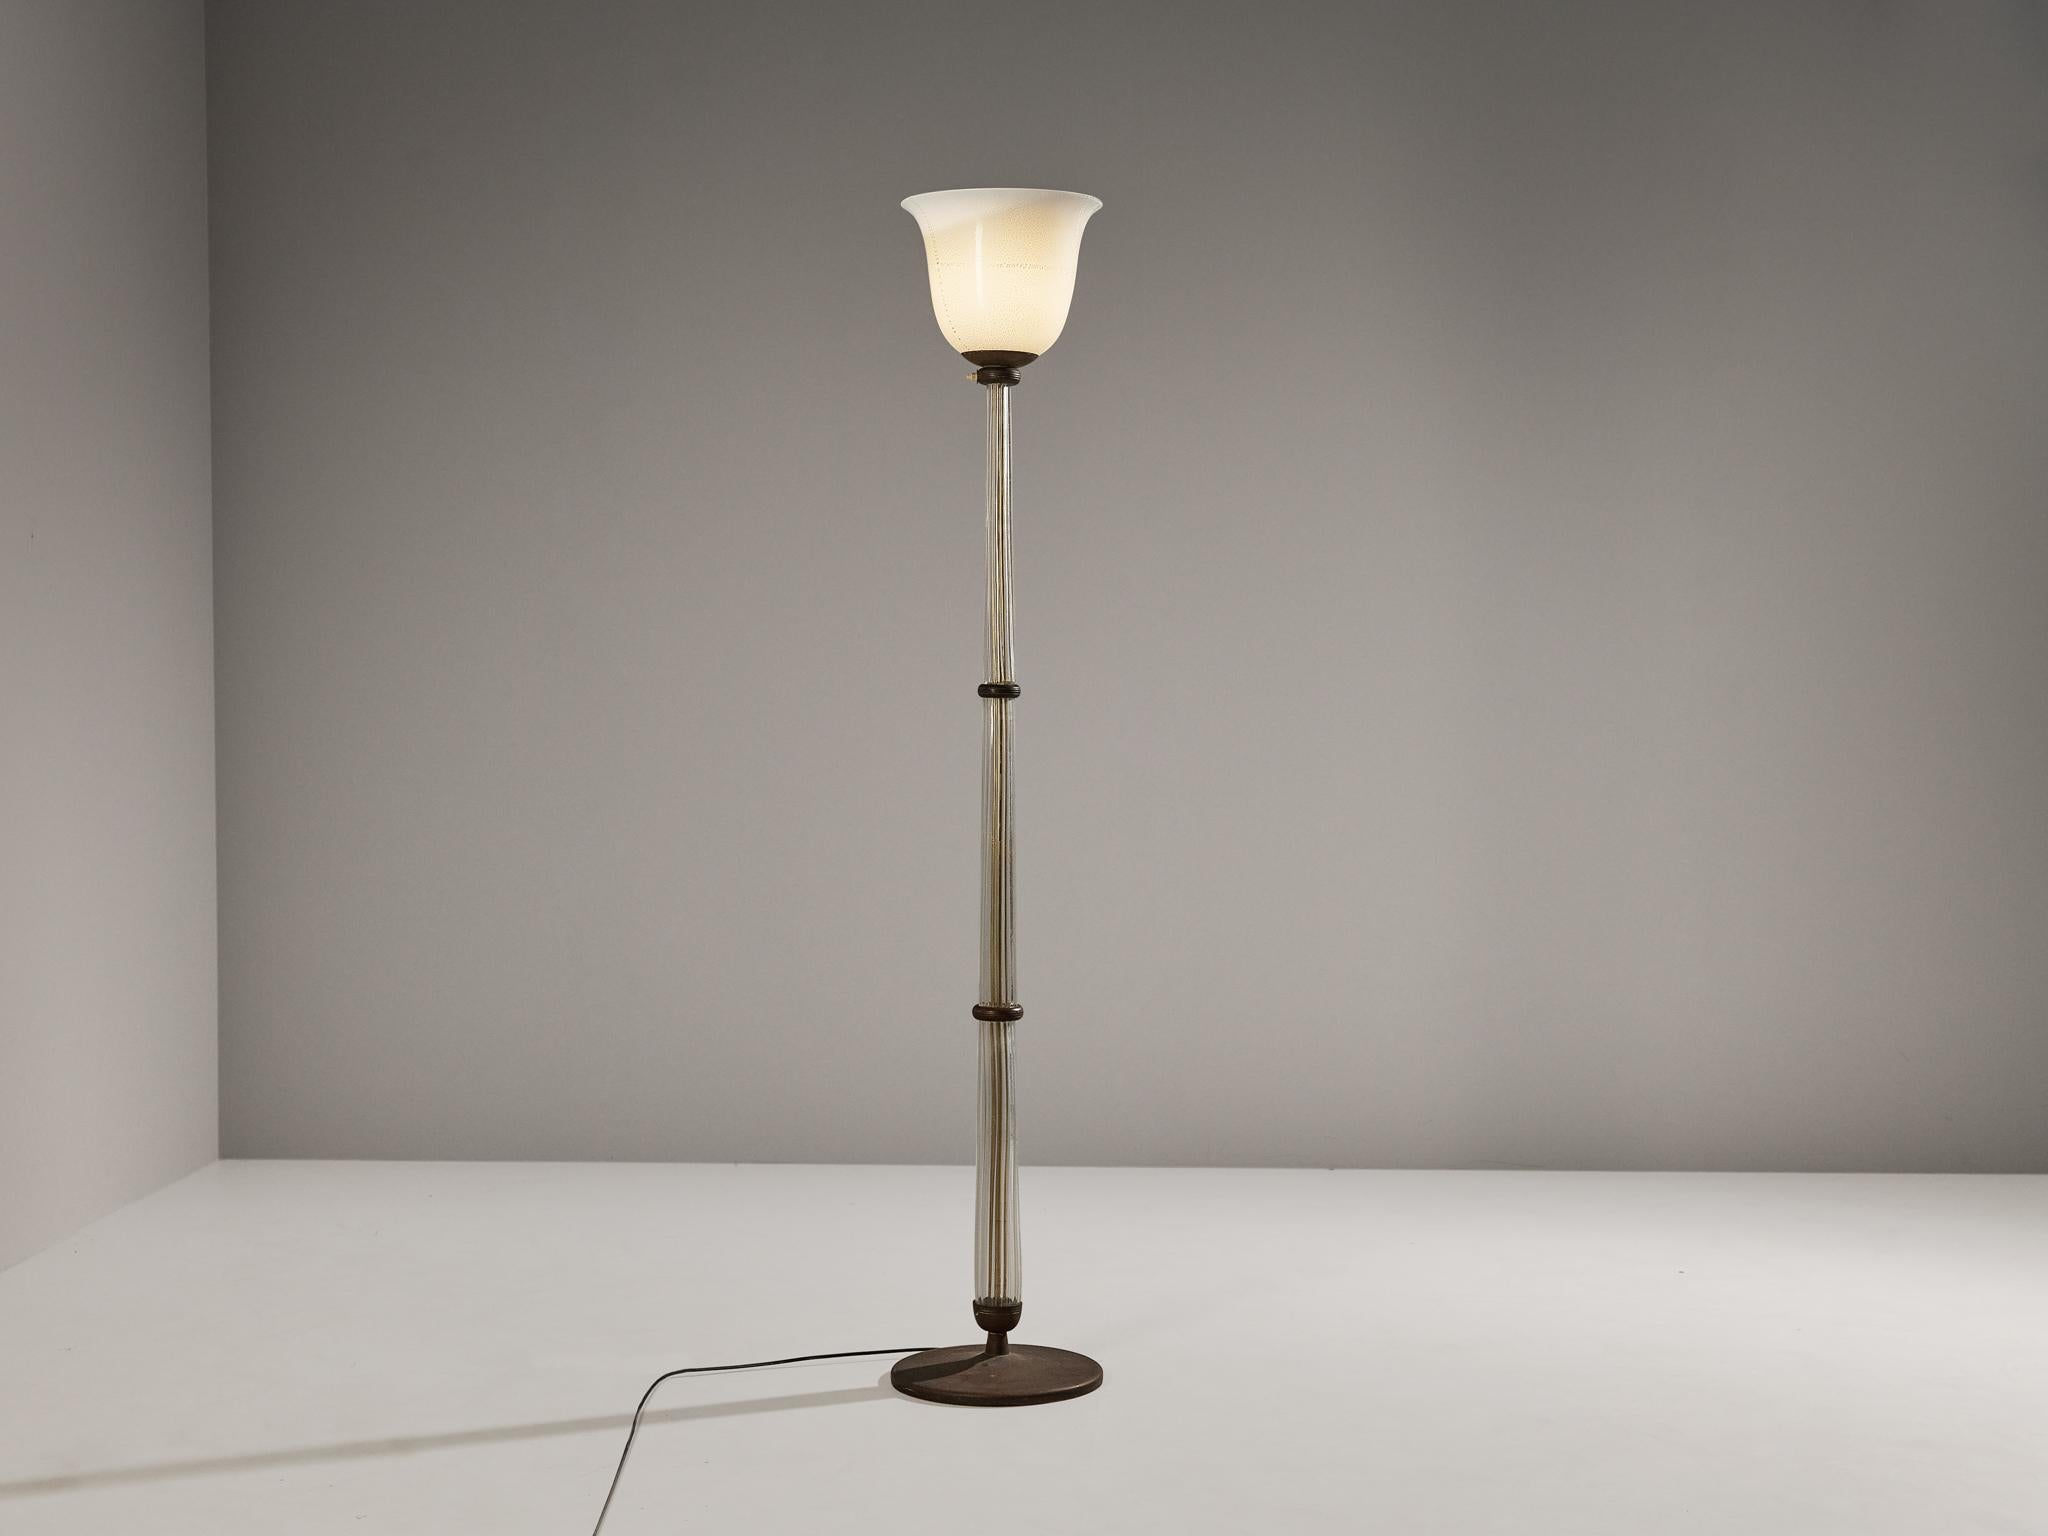 Tomaso Buzzi for Venini, floor lamp, model '502', alga glass, glass, brass, gold leaf, Italy, 1933-1938

A truly magnificent Italian floor lamp designed by the Milanese multidisciplinary artist Tomasso Buzzi (1900-1981) for the esteemed glass